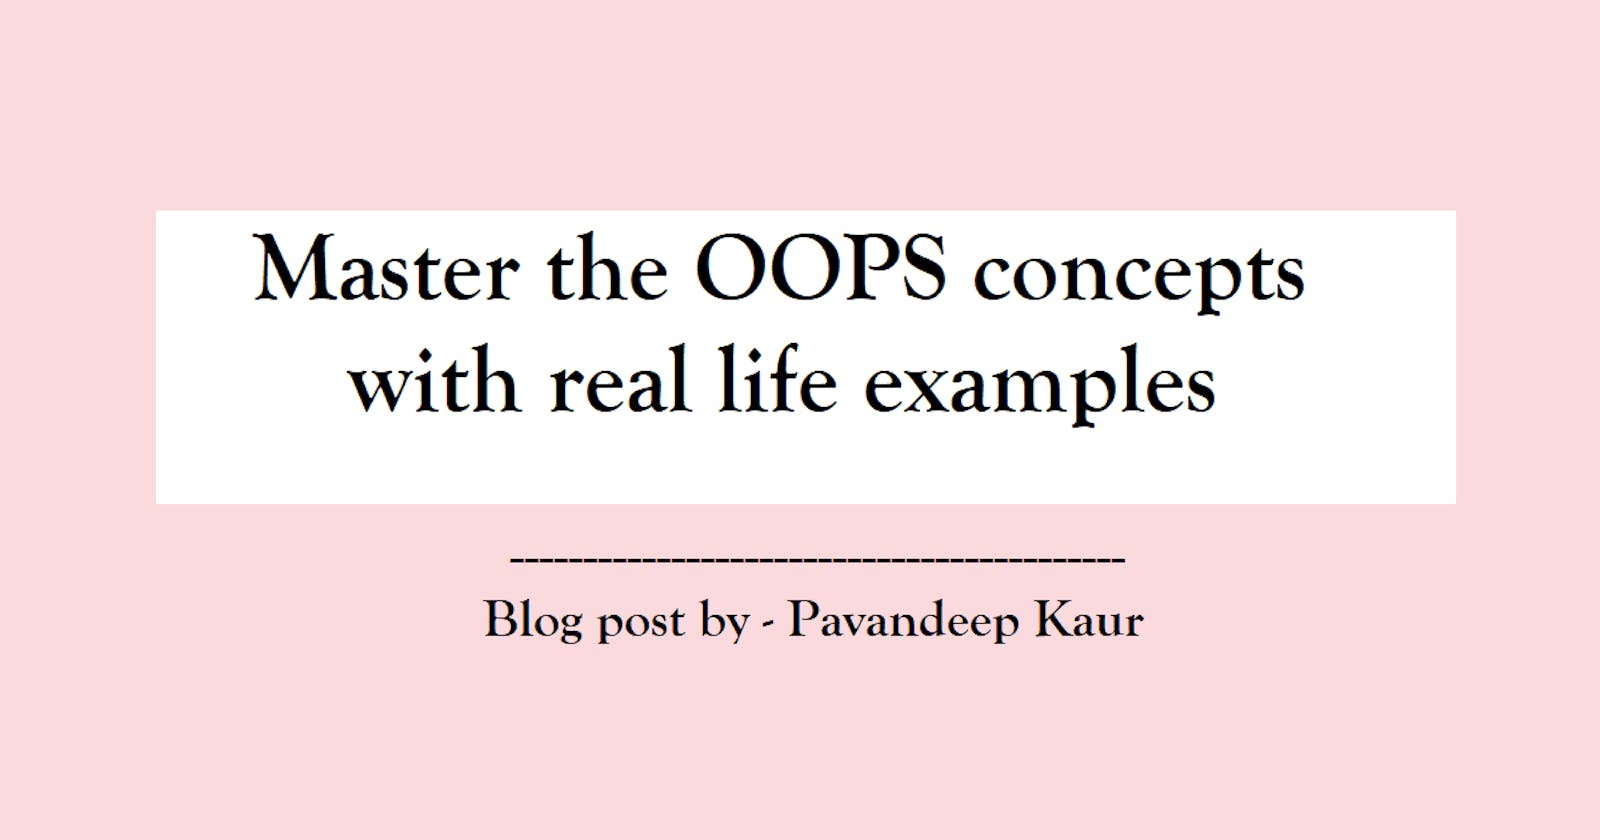 Master the OOPS concepts with real life examples